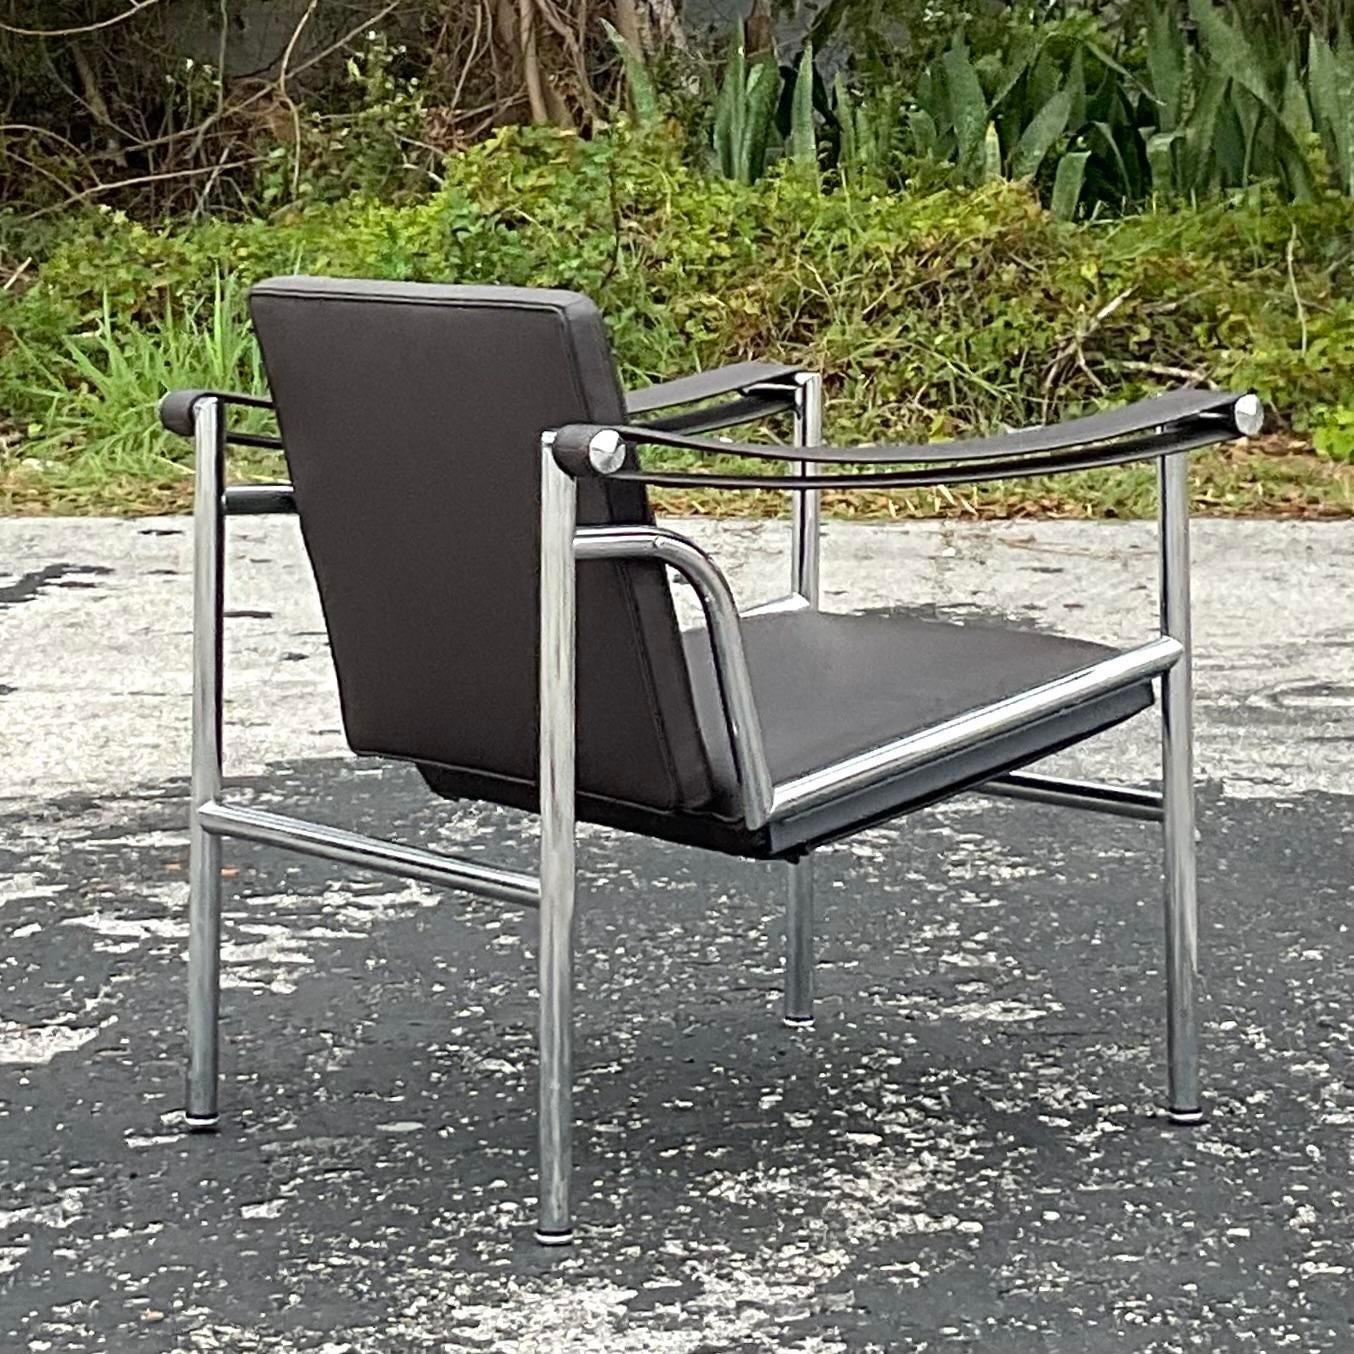 A fantastic vintage Contemporary leather lounge chair. The iconic Corbusier design made by the Cassina group in Italy. Beautiful chrome frame with a deep brown leather upholstery. Tagged on the back. Acquired from a Palm Beach estate.